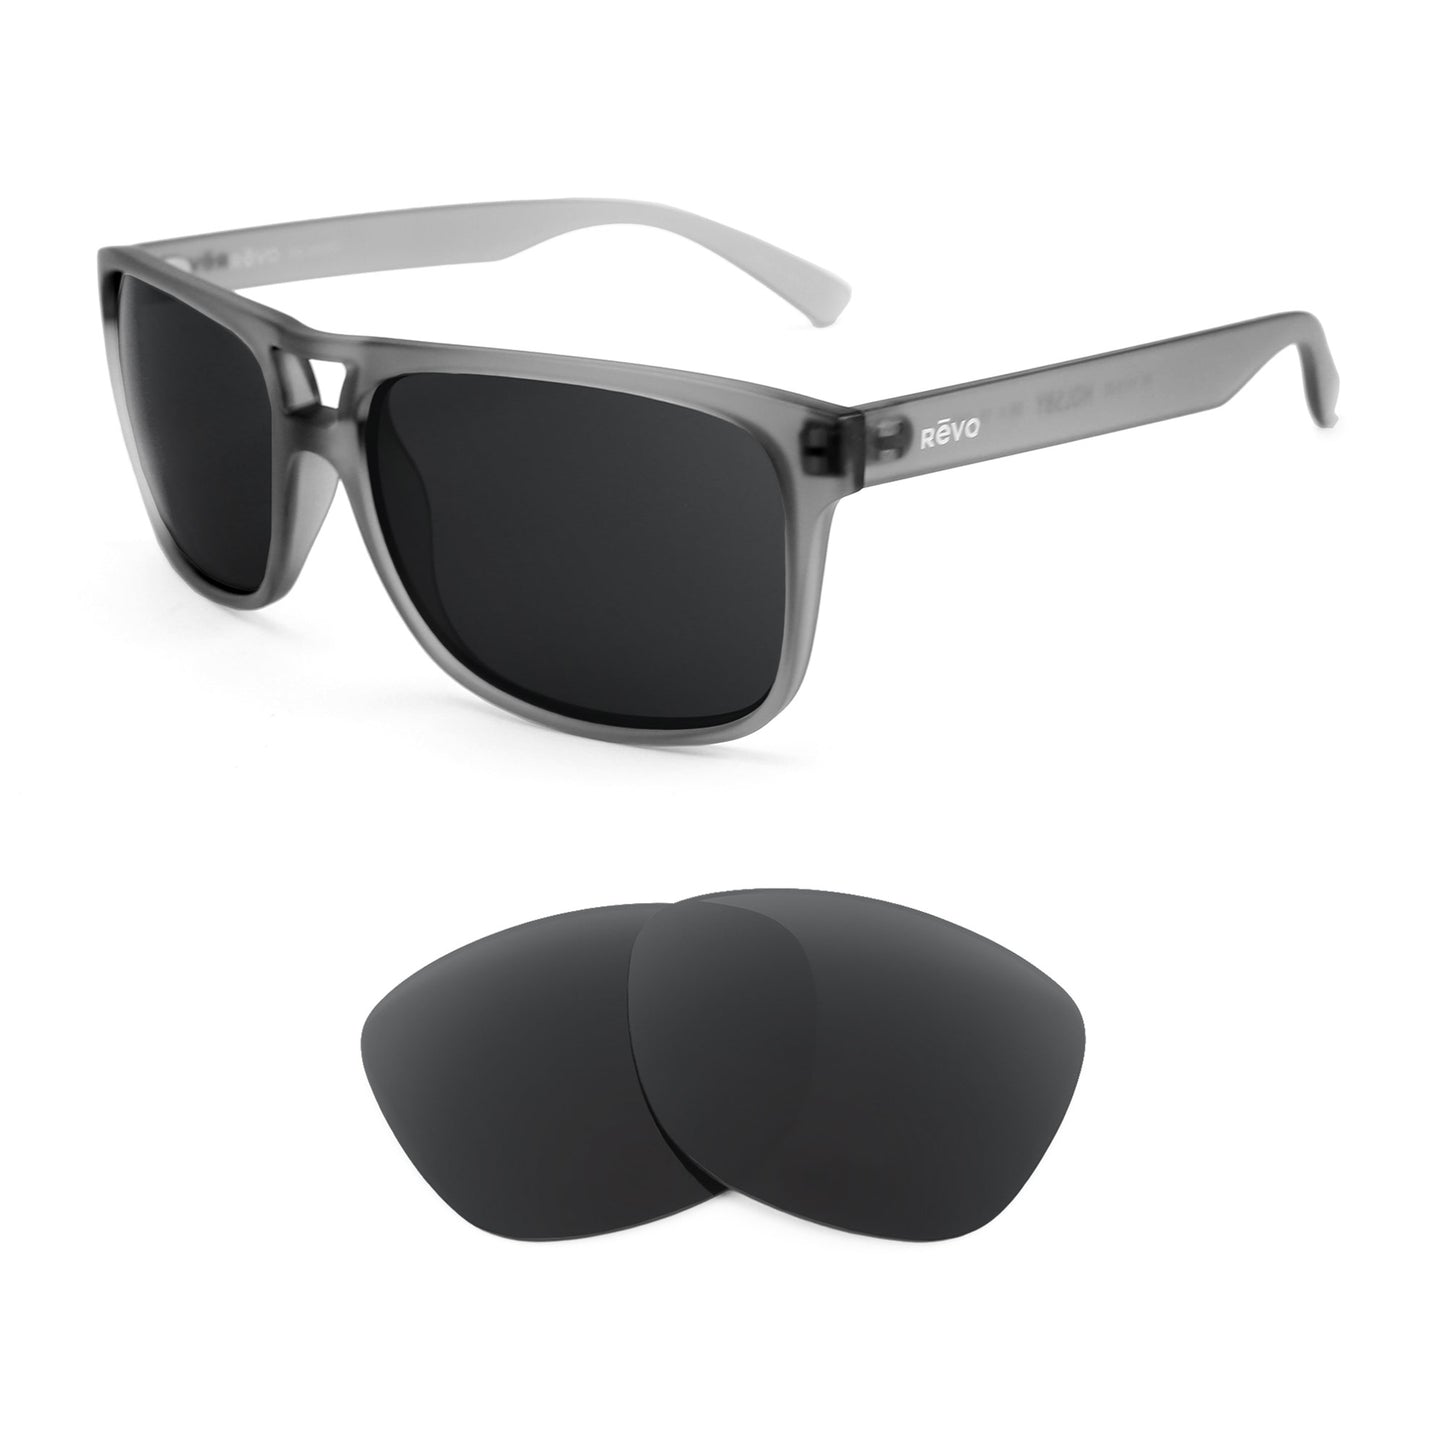 Revo Holsby RE1019 sunglasses with replacement lenses